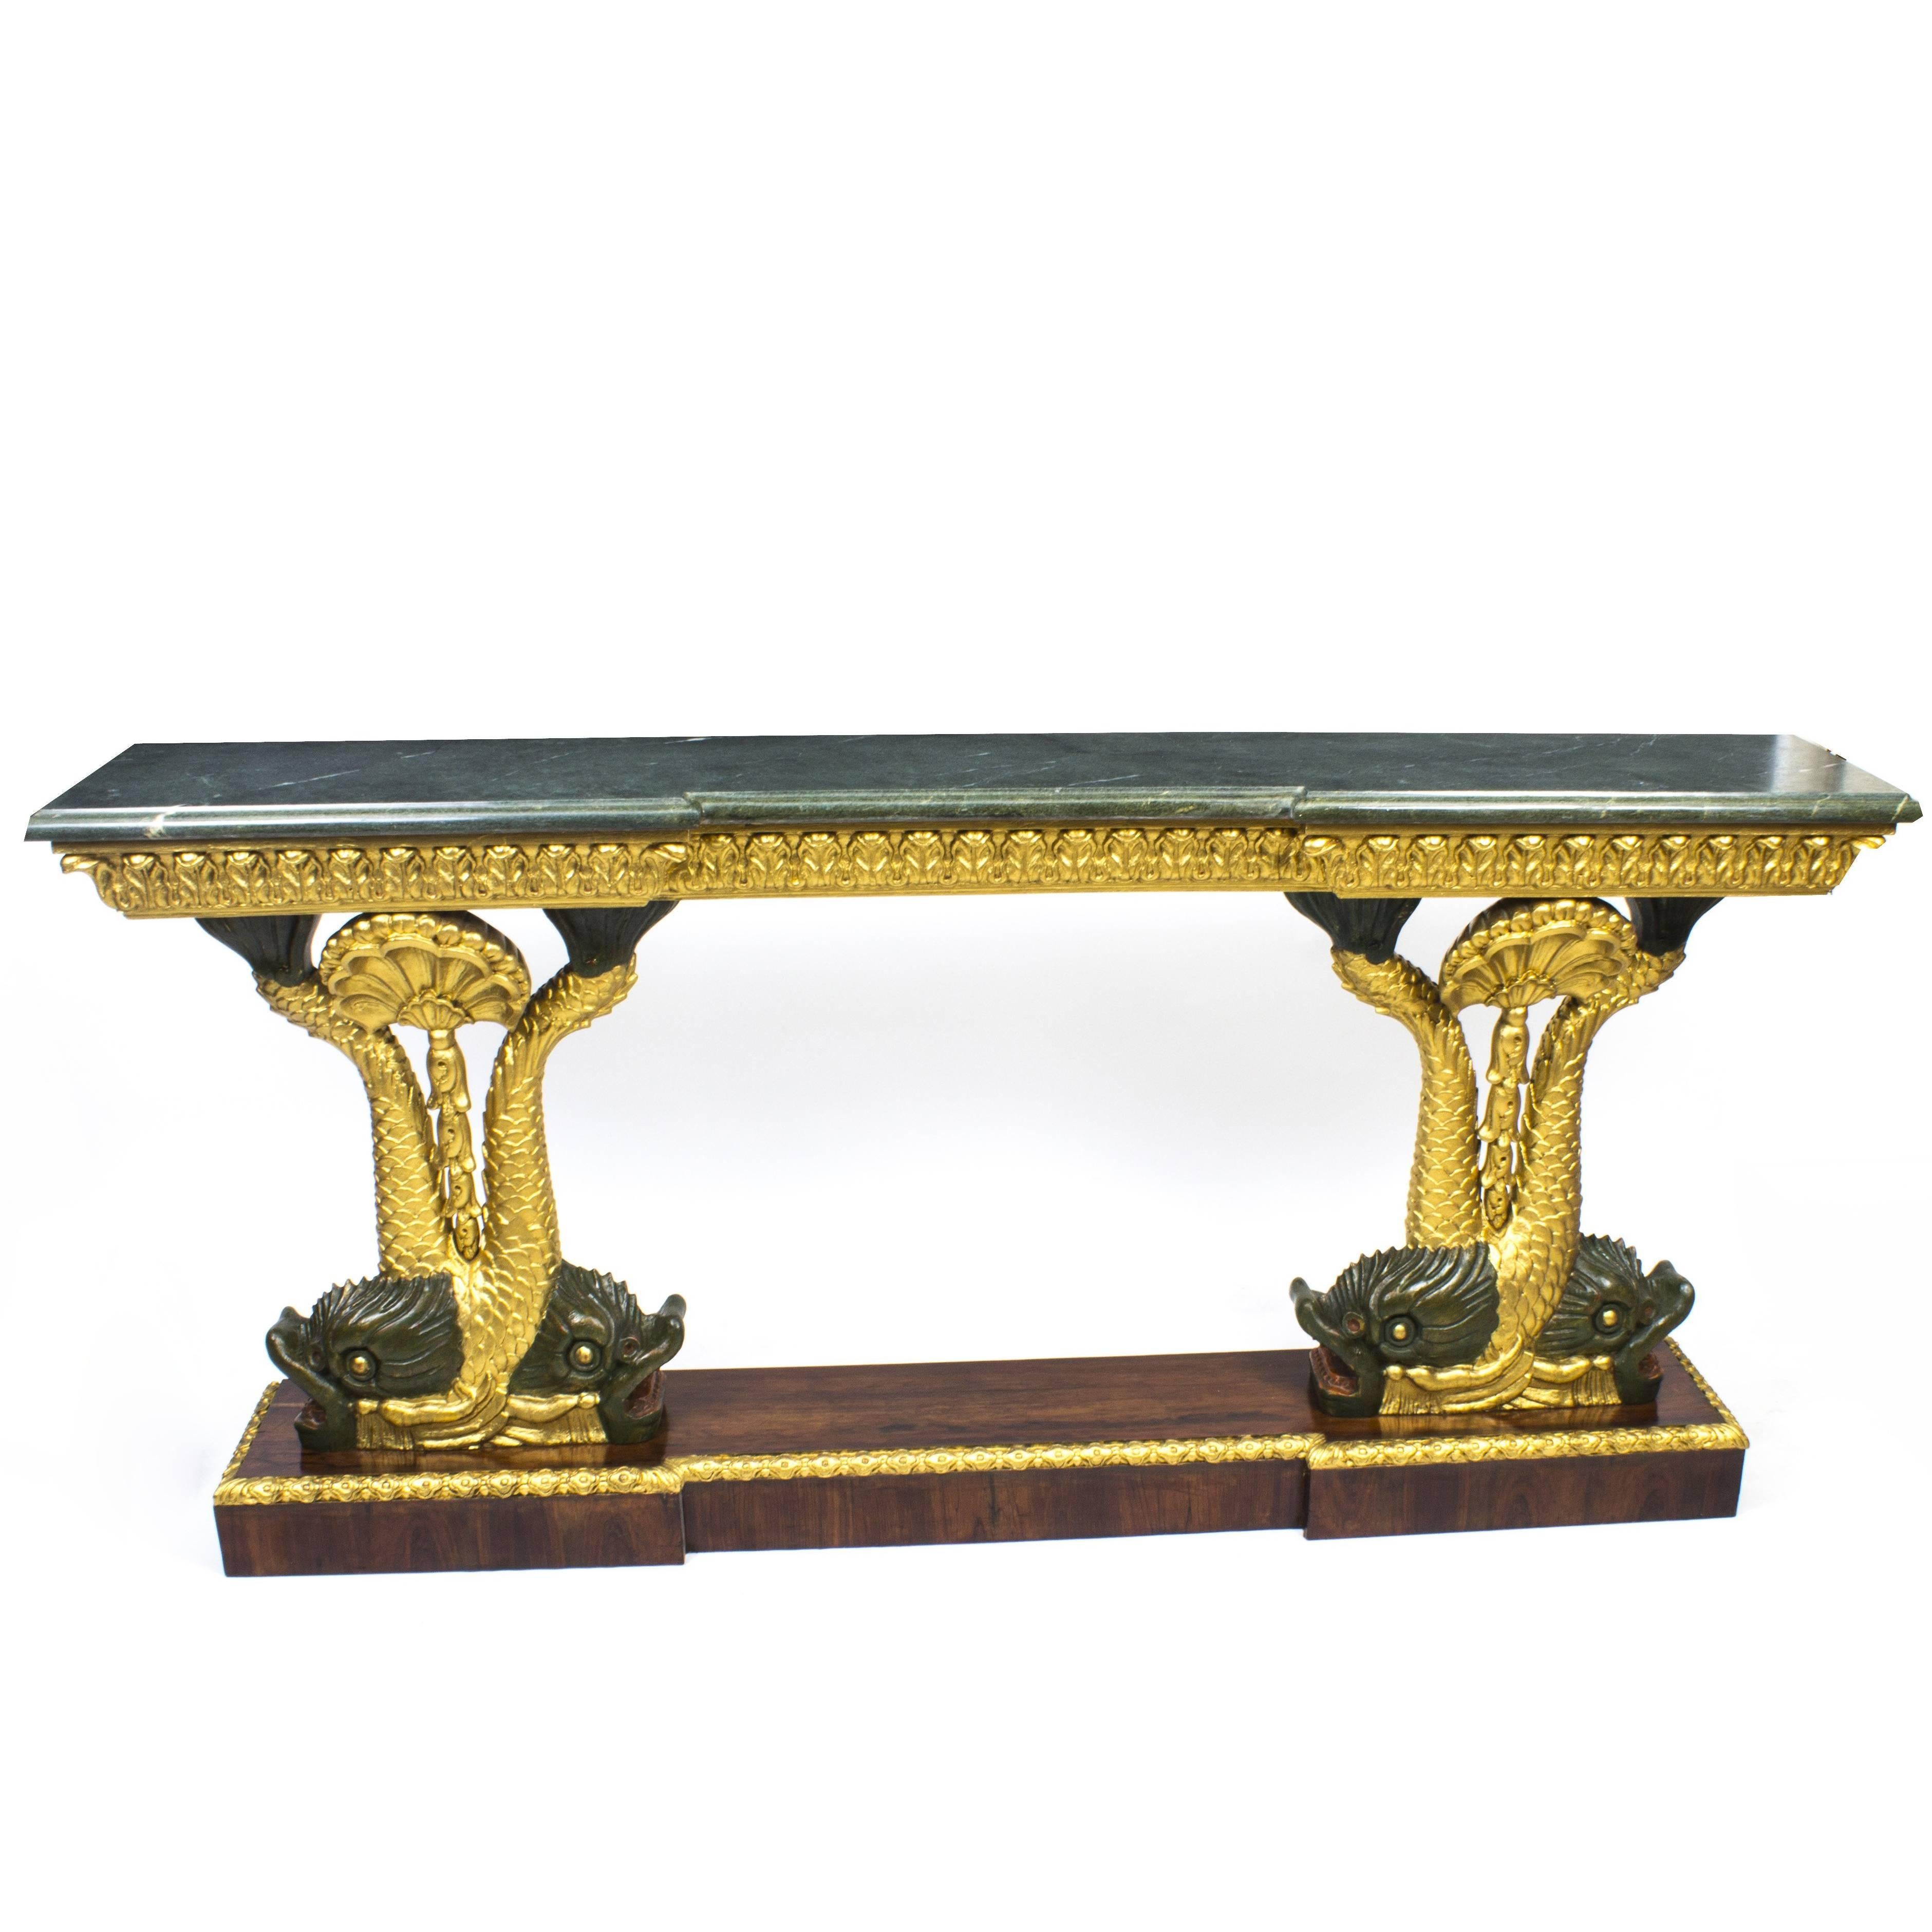 Early 20th Century Entwined Gilded Dolphins Console Pier Table